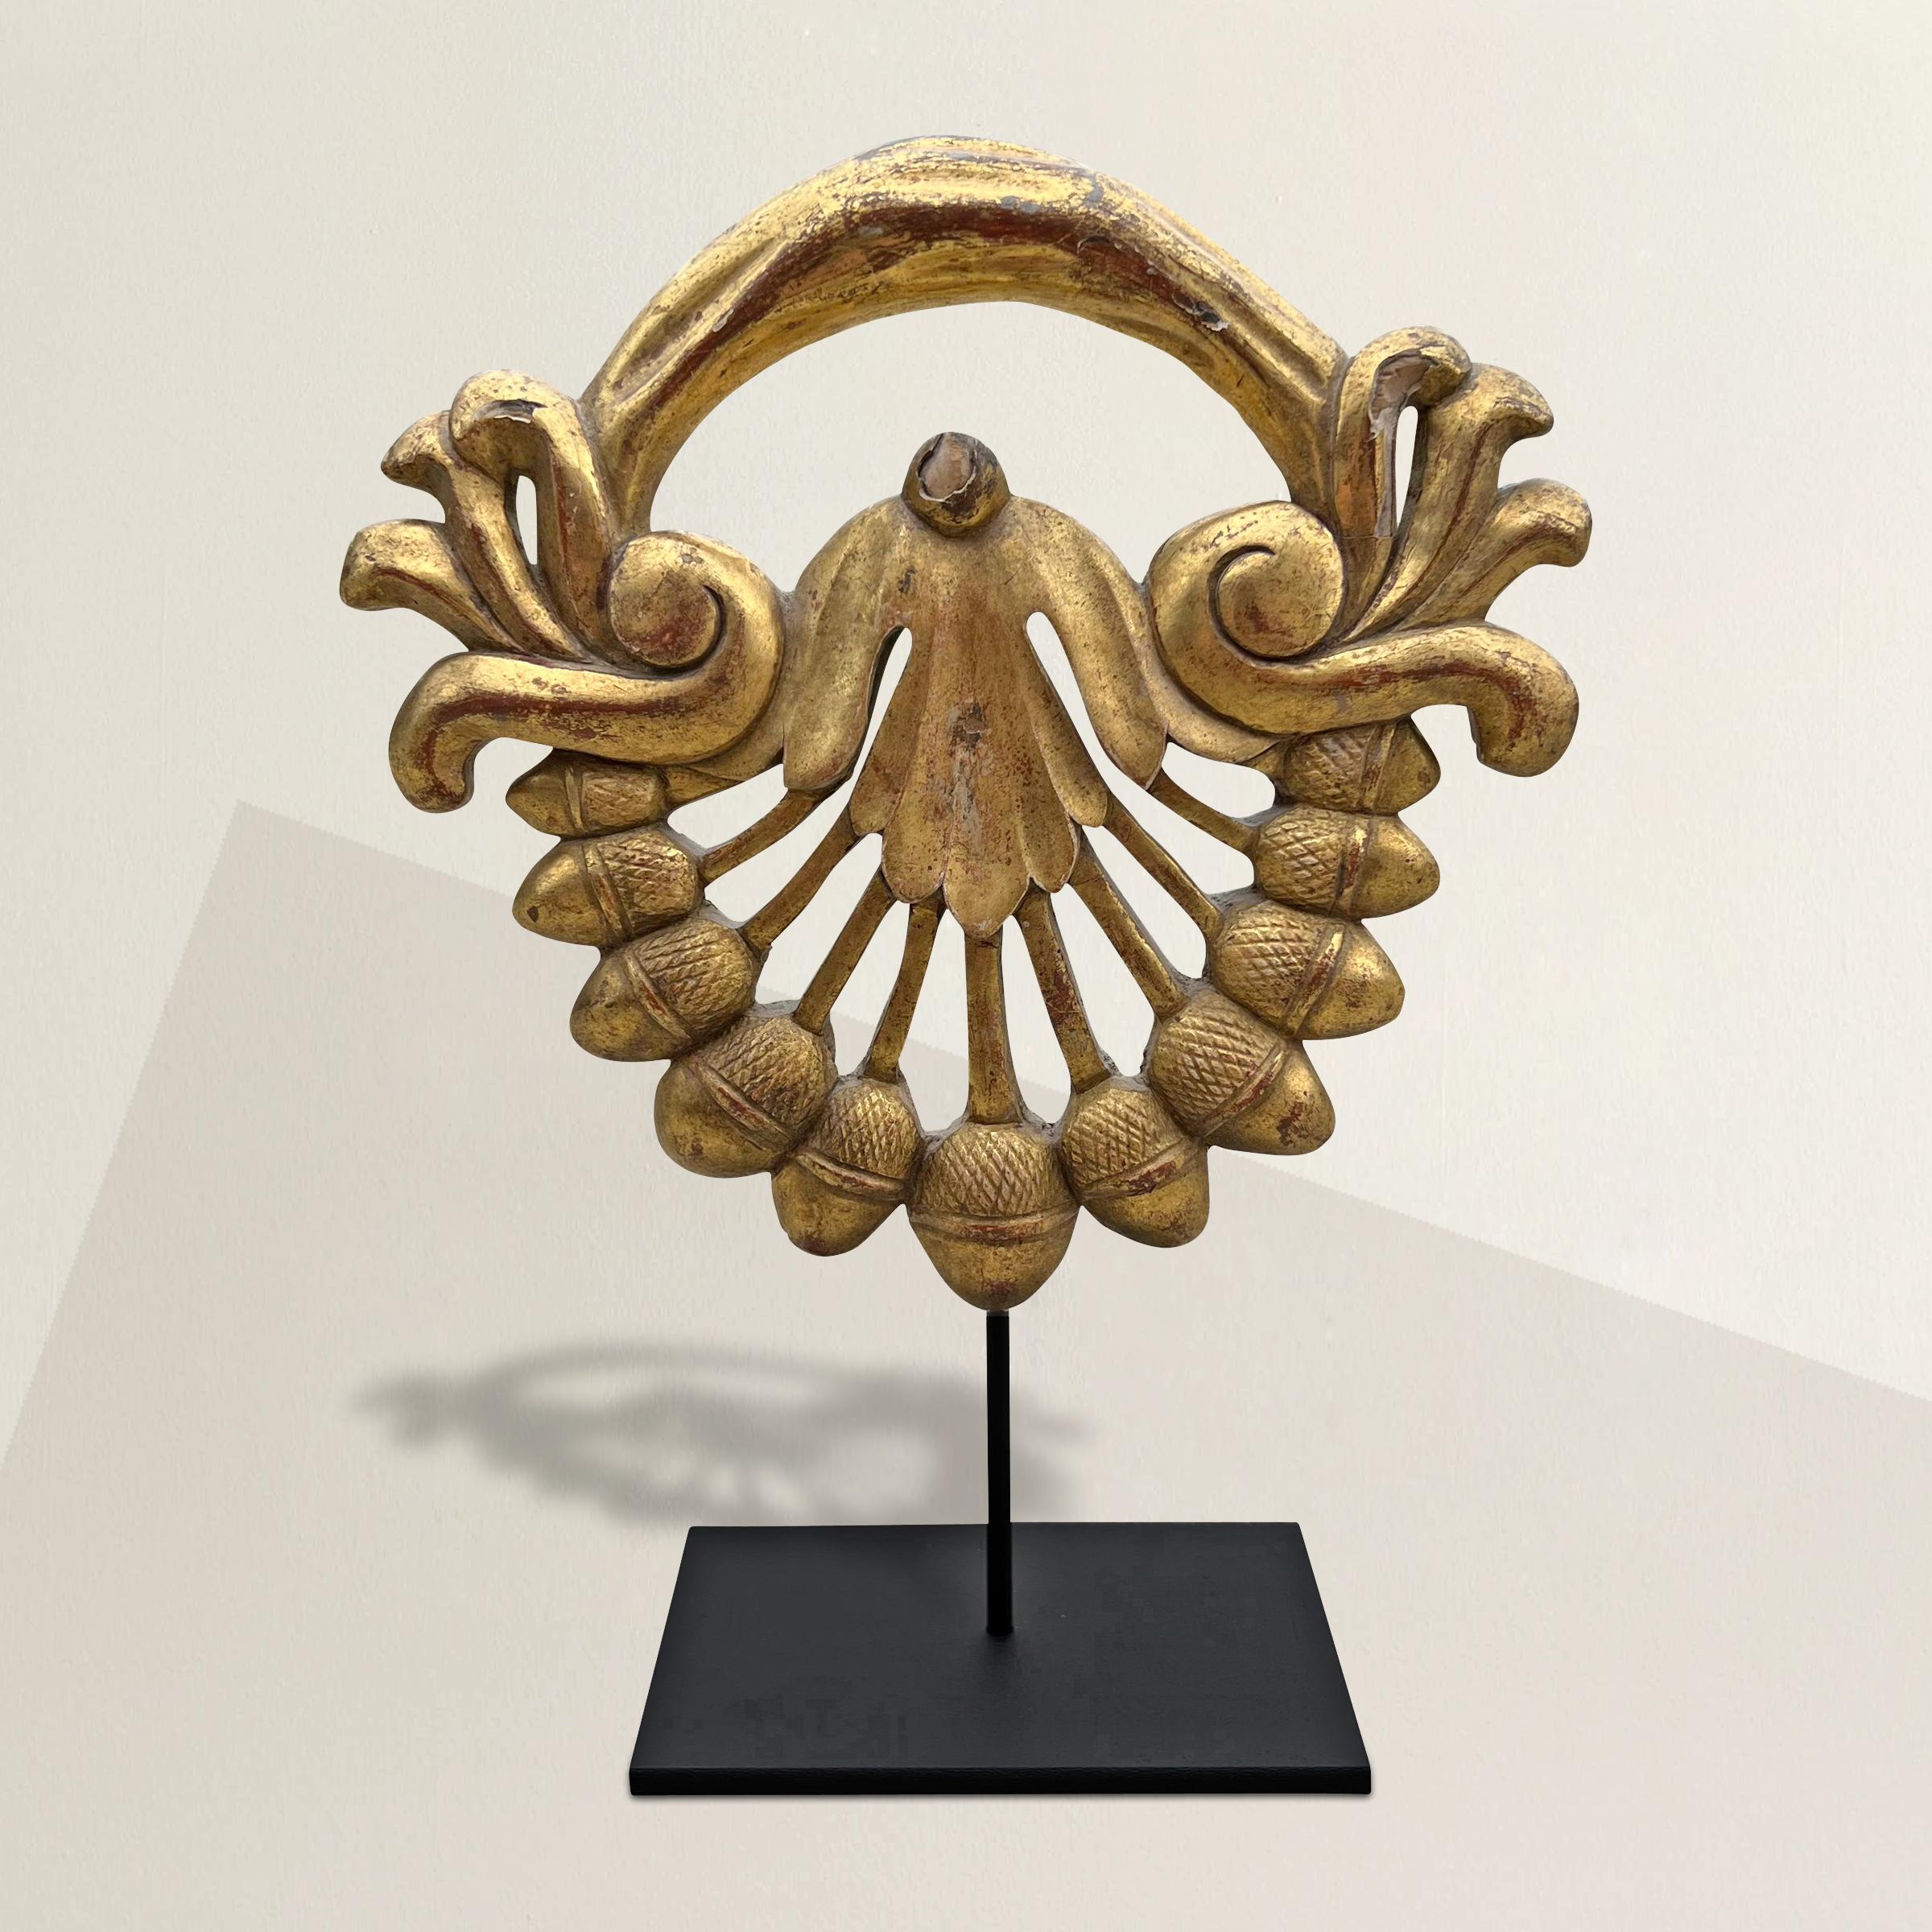 A whimsical 19th century French hand-carved and gilt cartouche fragment with acorns and foliate decorations, and mounted on a custom steel mount. Since ancient Roman times, acorns have symbolized strength, prosperity, and longevity. To this day, it